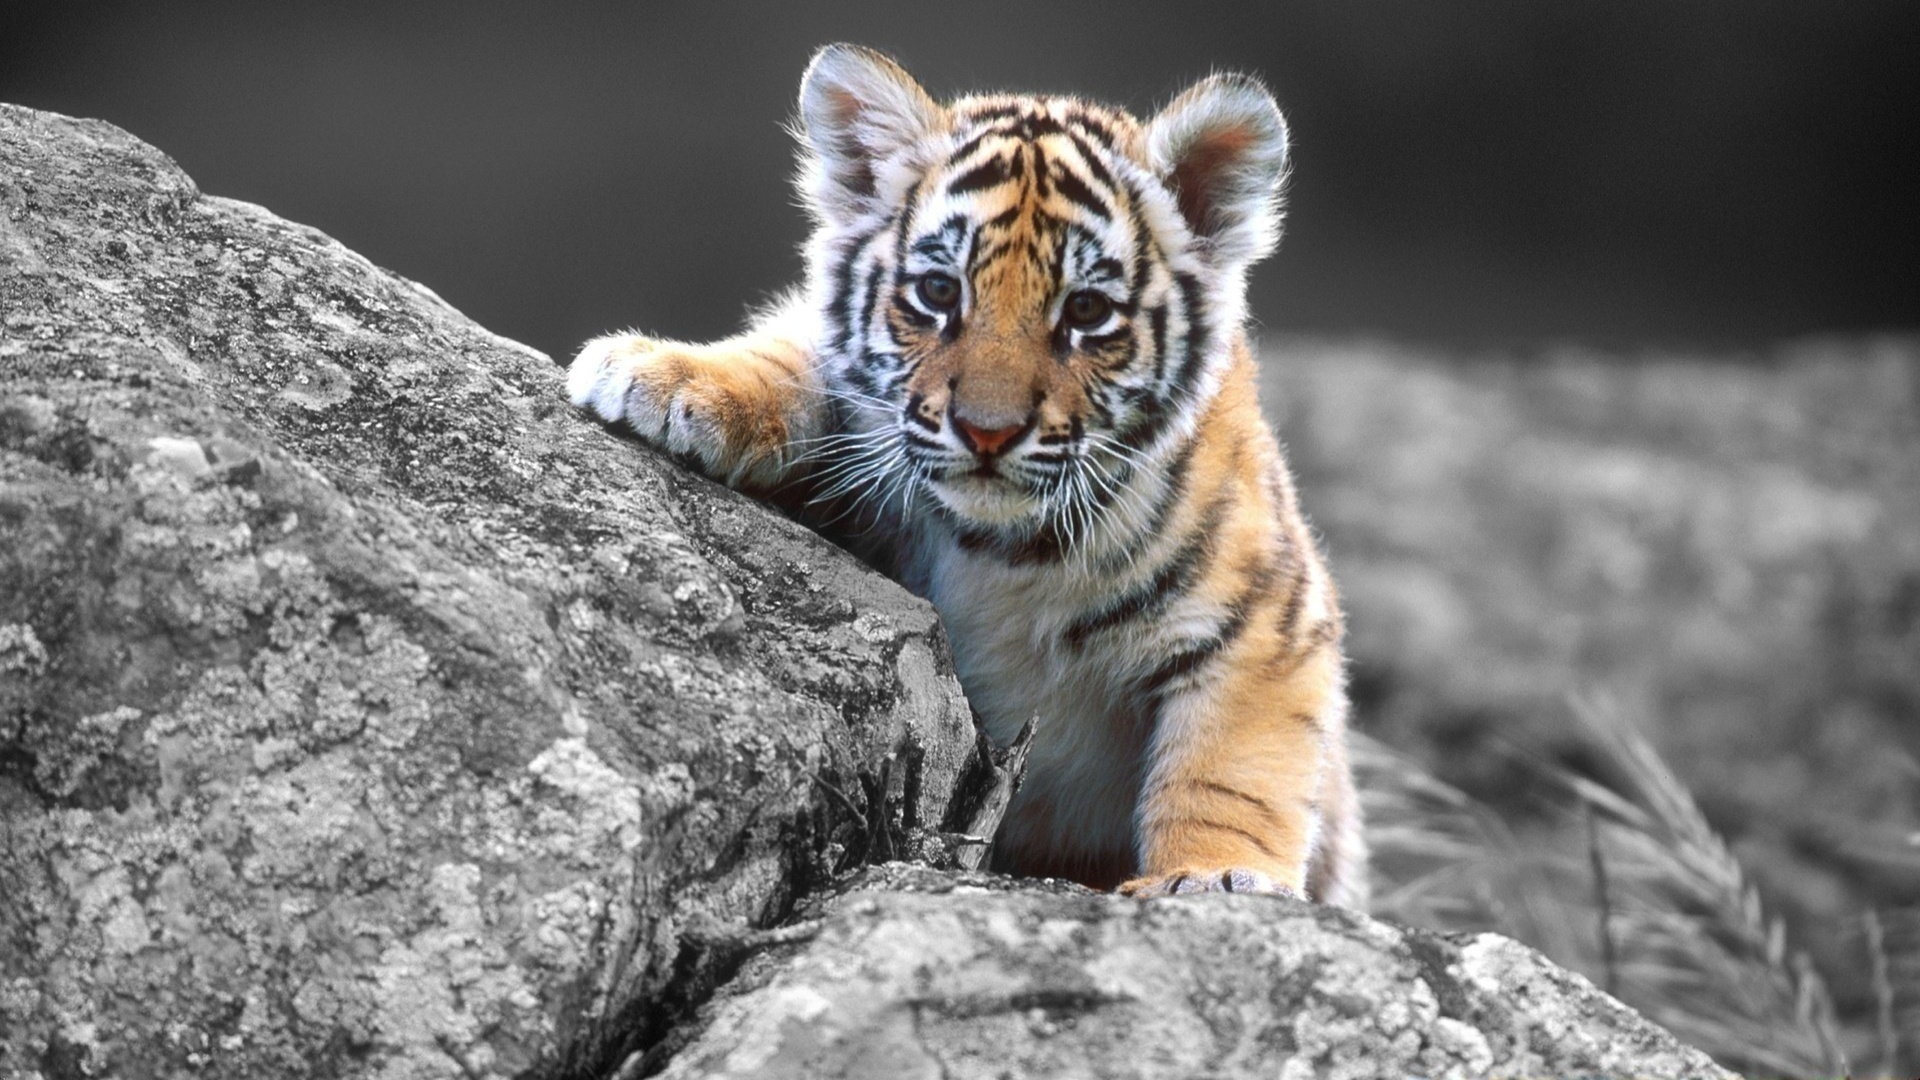 tiger baby hd wallpapers | Desktop Backgrounds for Free HD ...